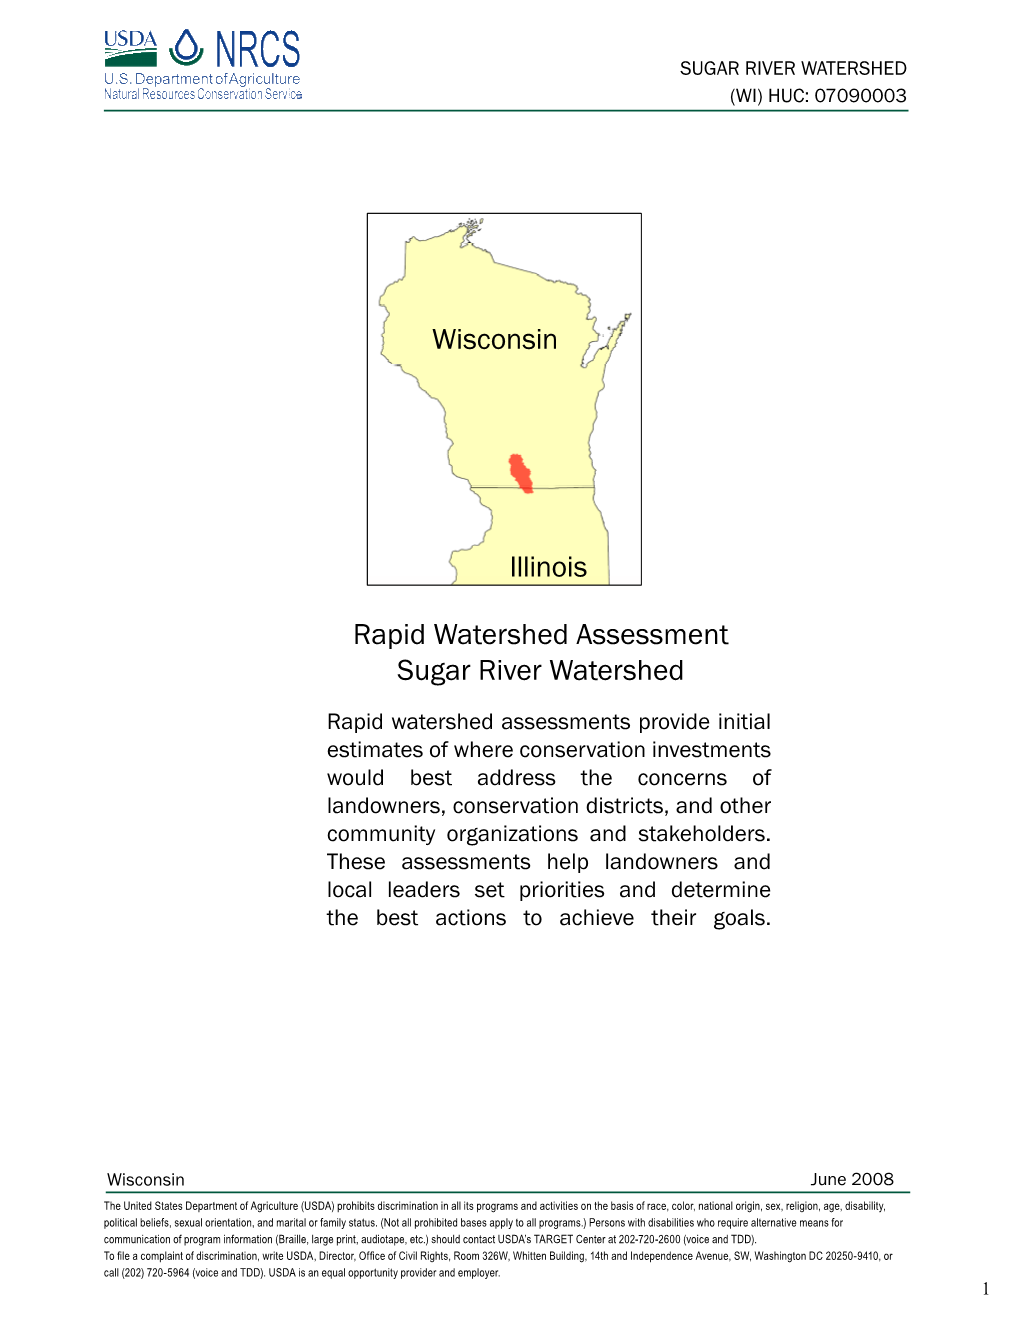 Rapid Watershed Assessment Sugar River Watershed Wisconsin Illinois